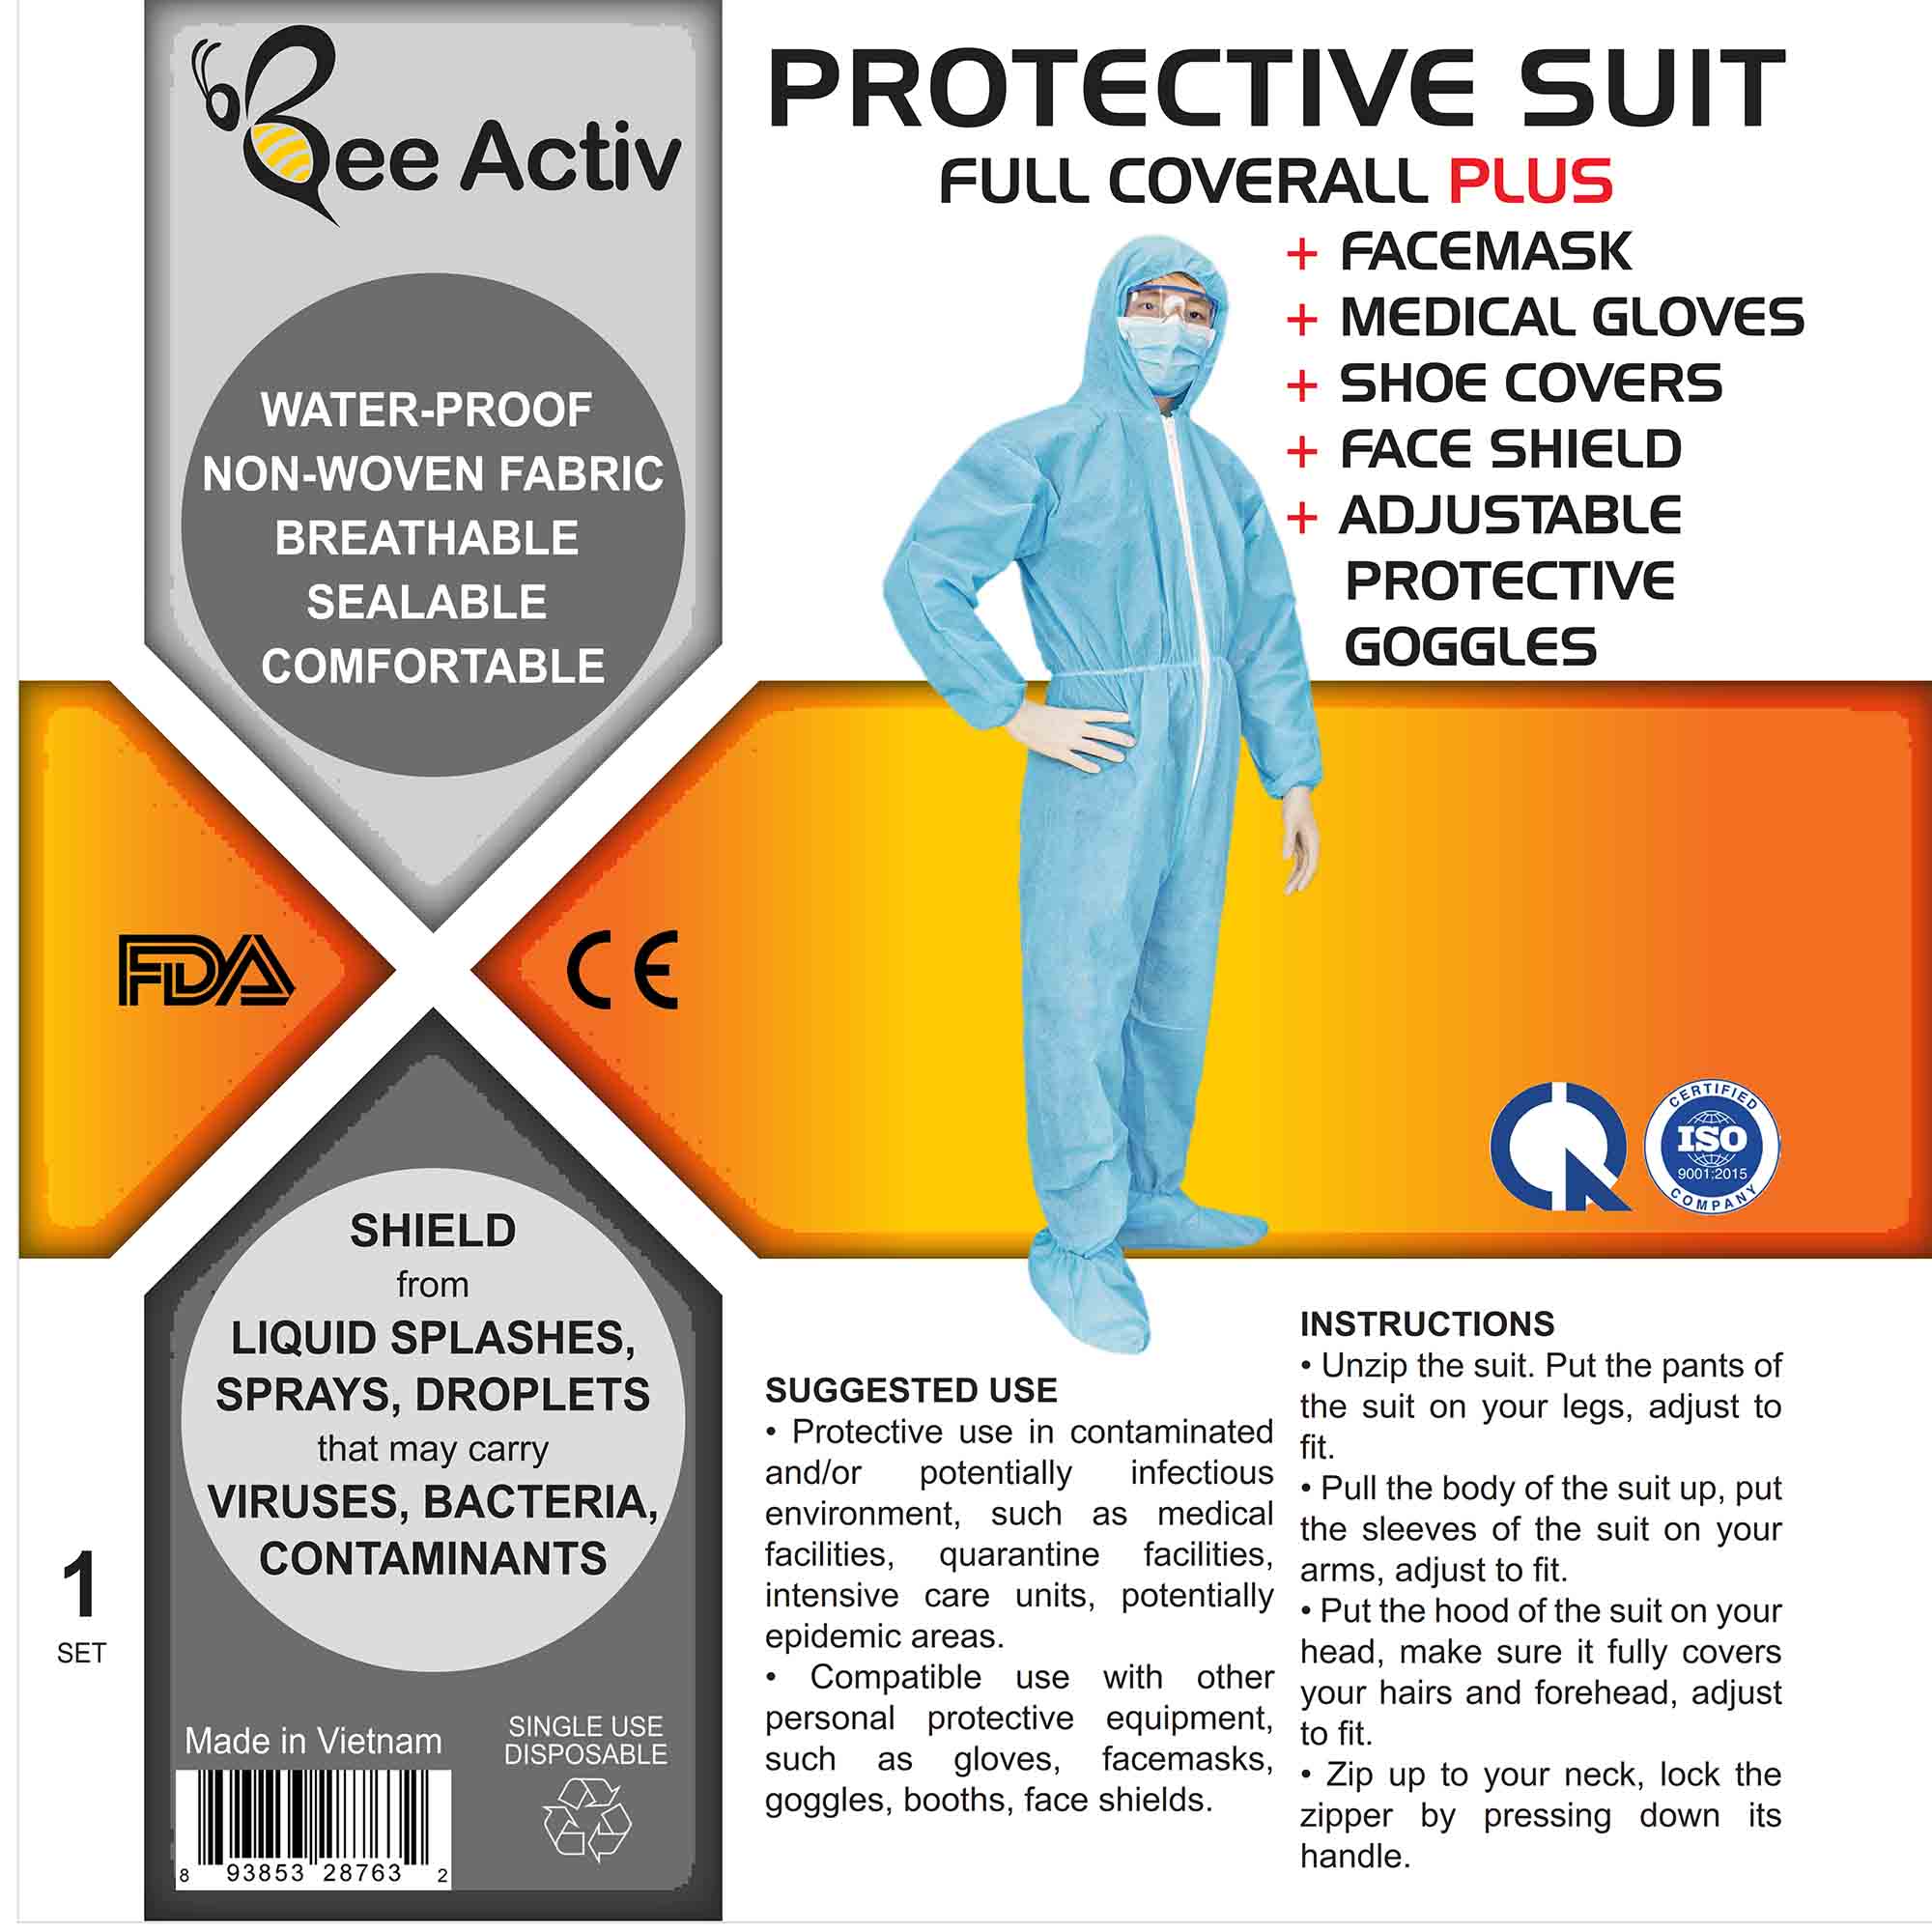 Protective suit Full coverall plus 5